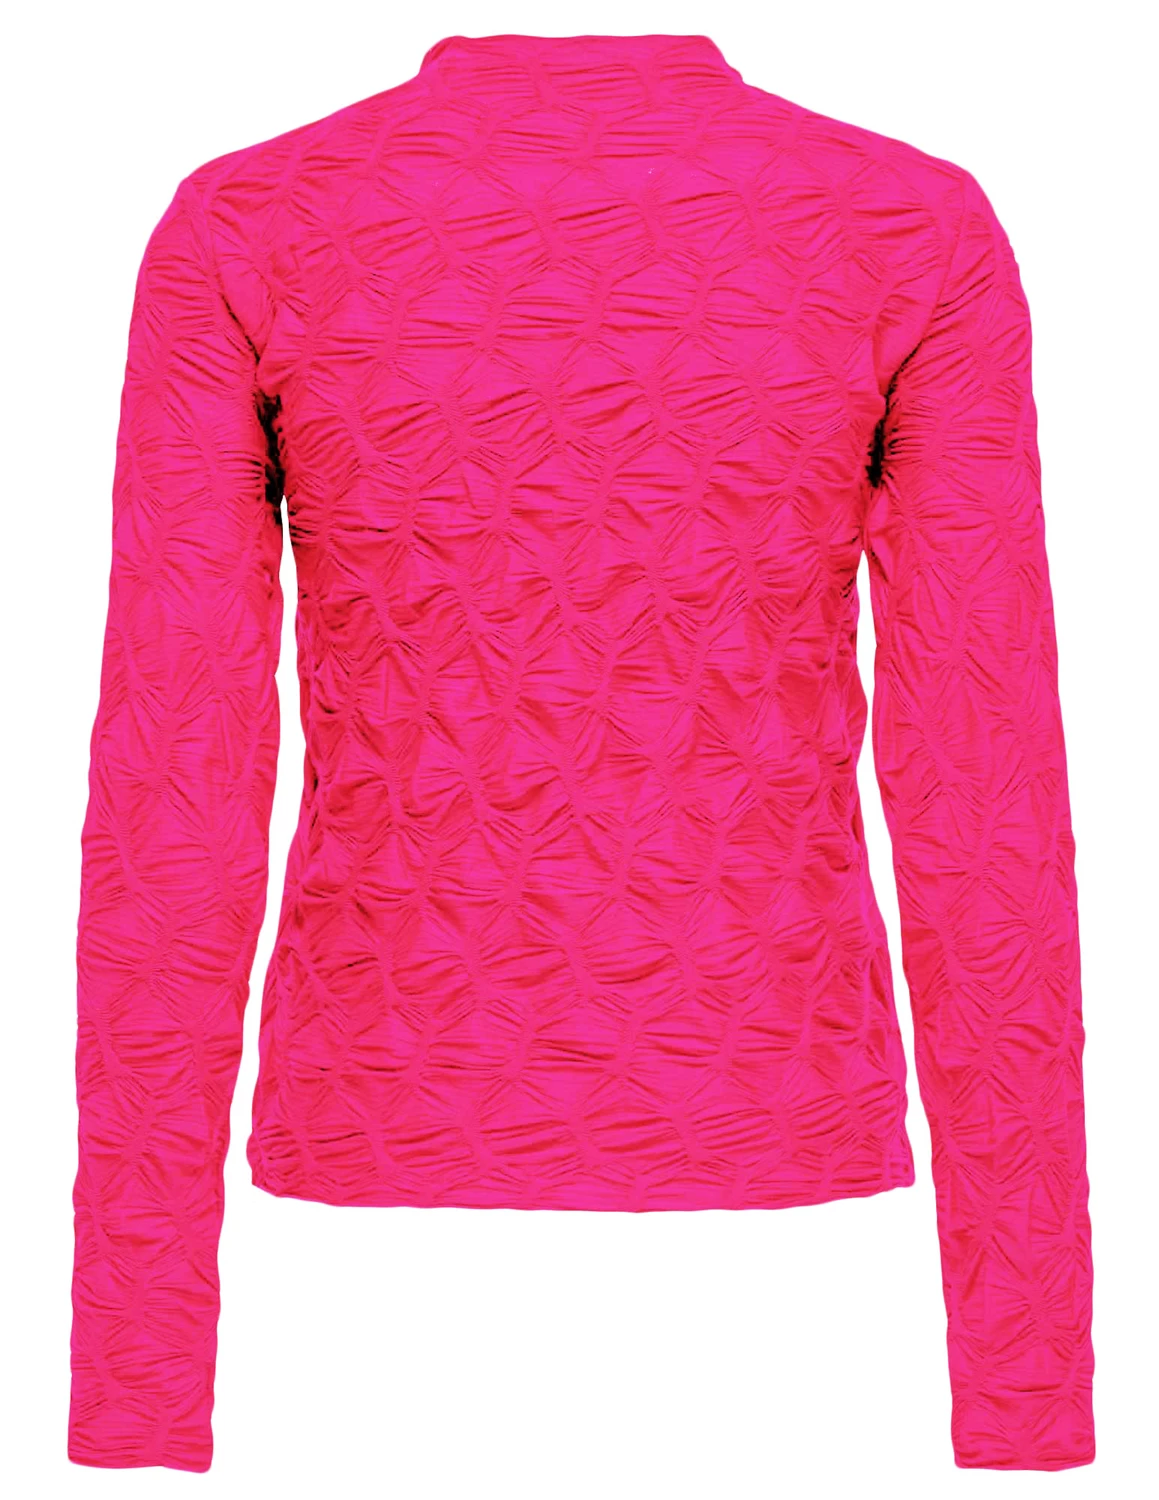 Only ONLNORA L/S STRUCTURE TOP Stone The kopen JRS roze bij 15307074